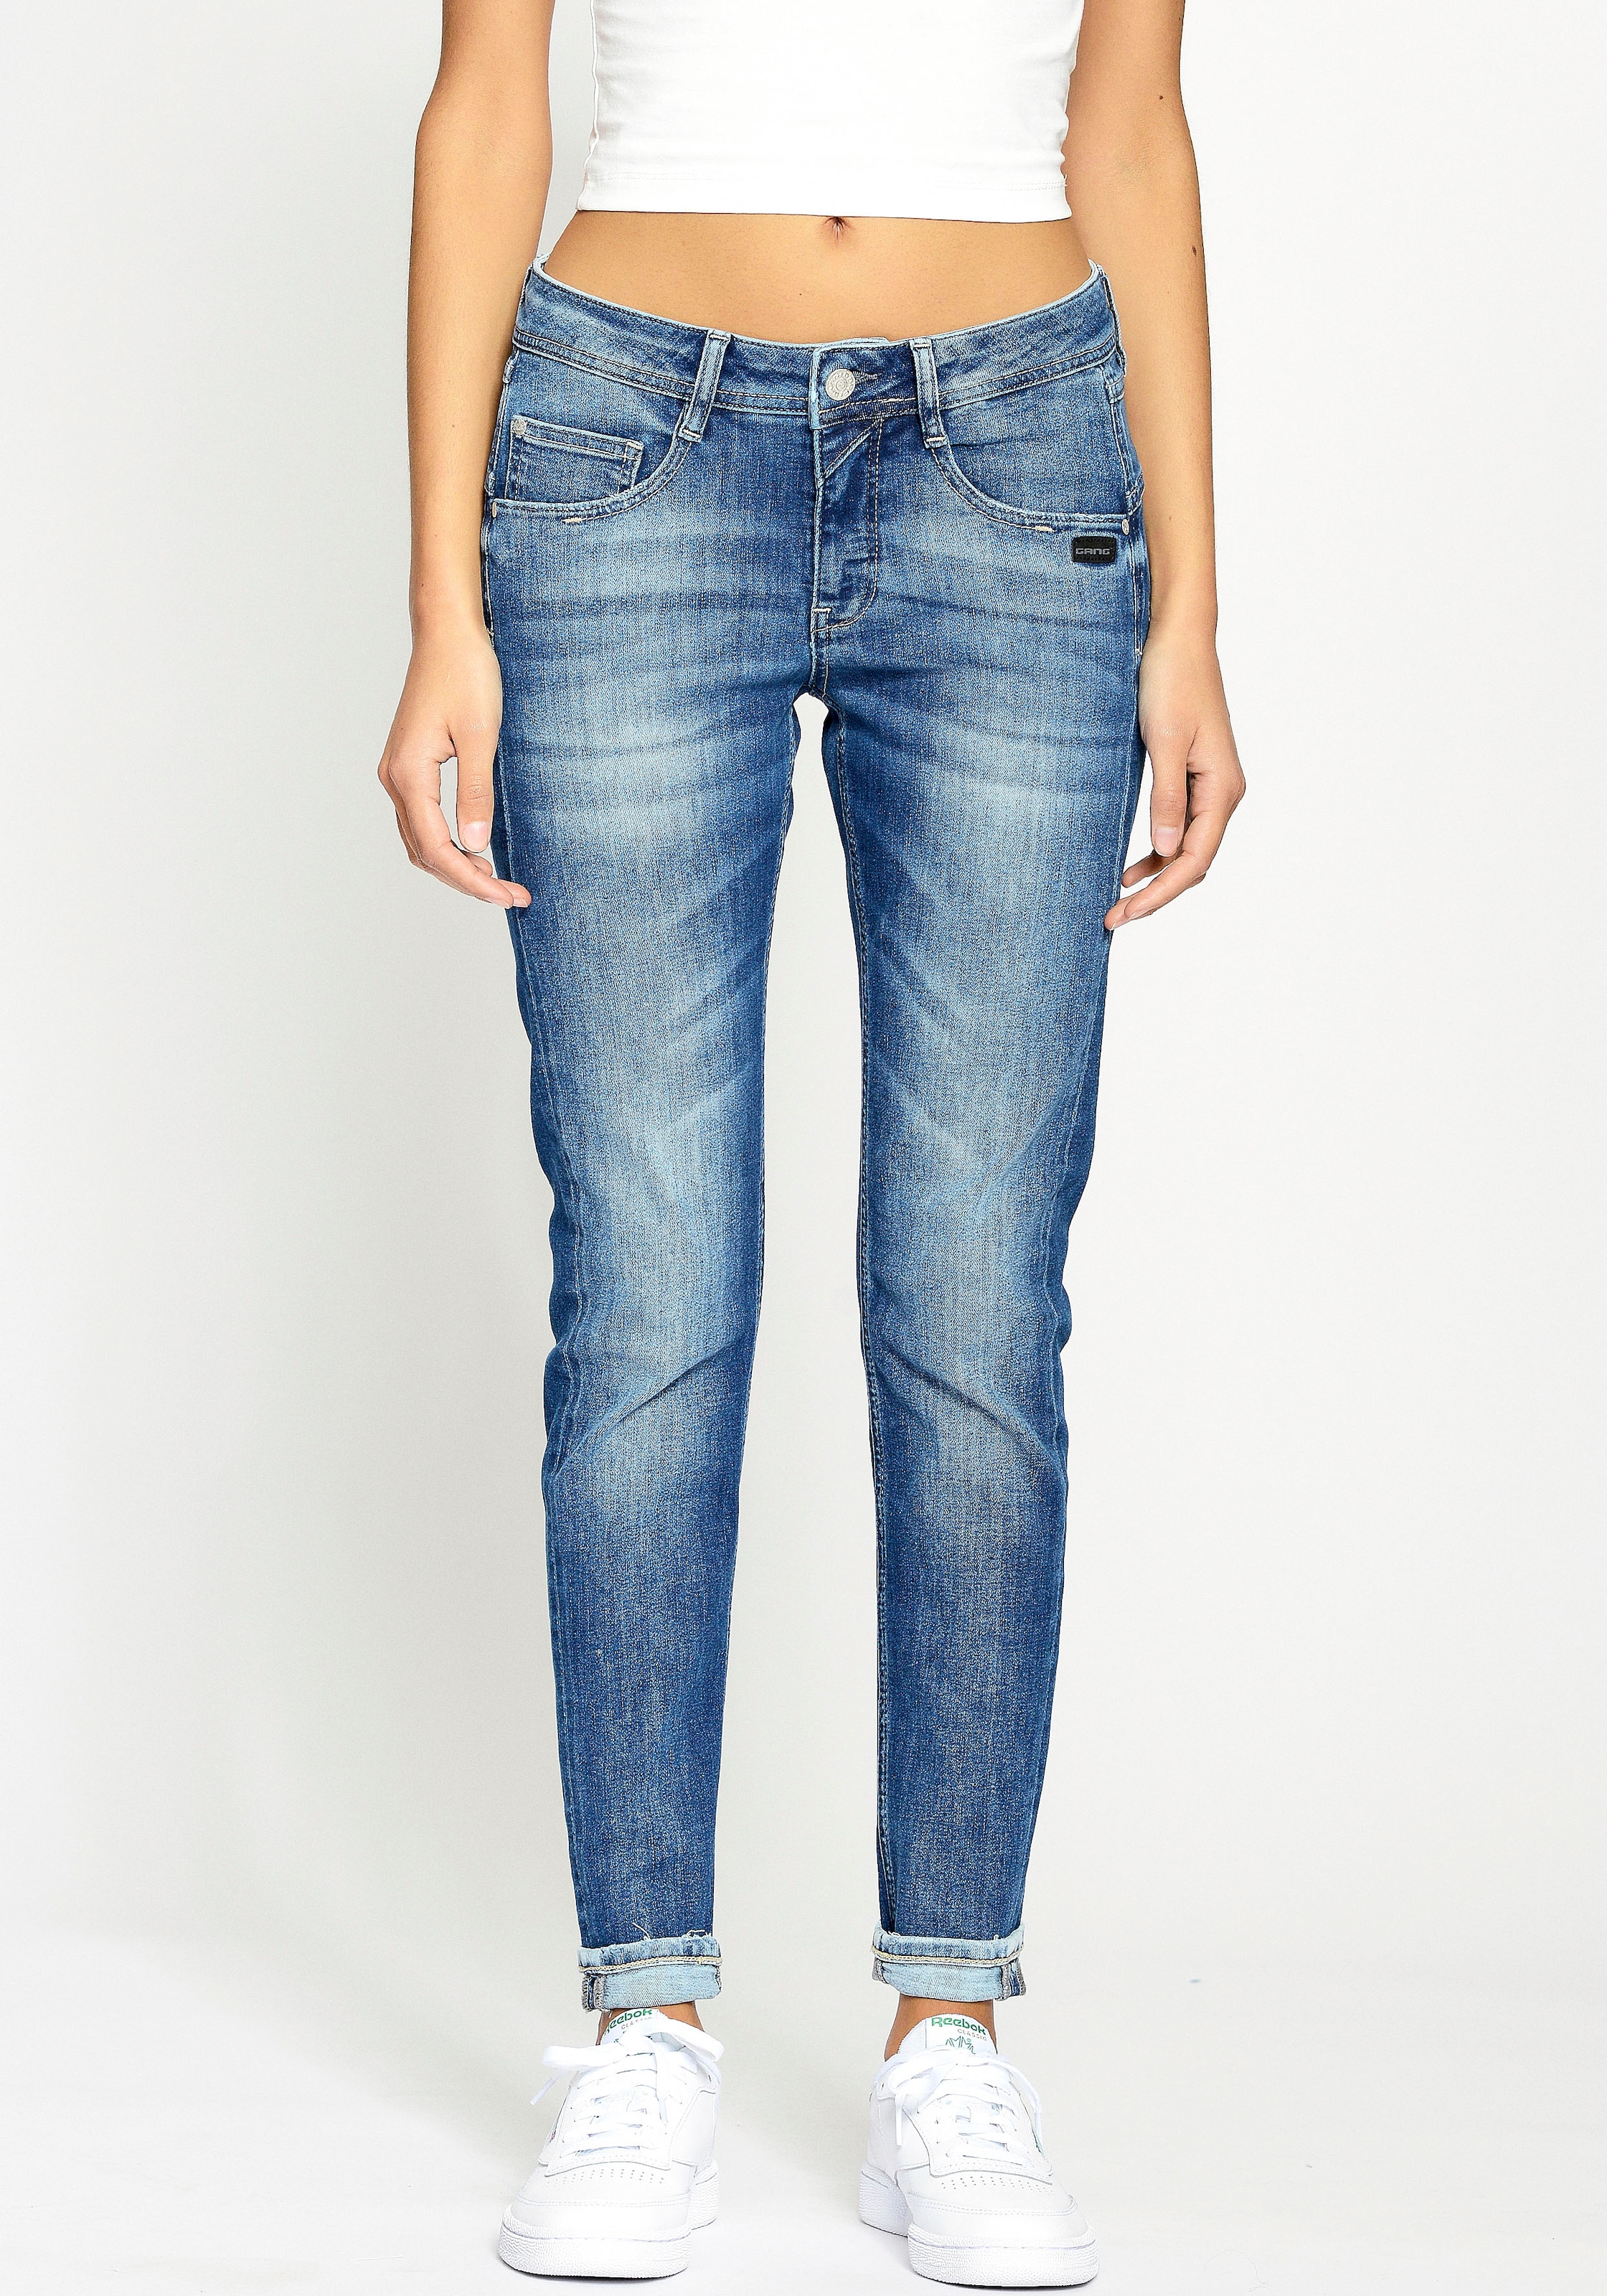 »94Amelie Relax-fit-Jeans Fit«, im Shop mit Online Used-Effekten OTTO GANG Relaxed